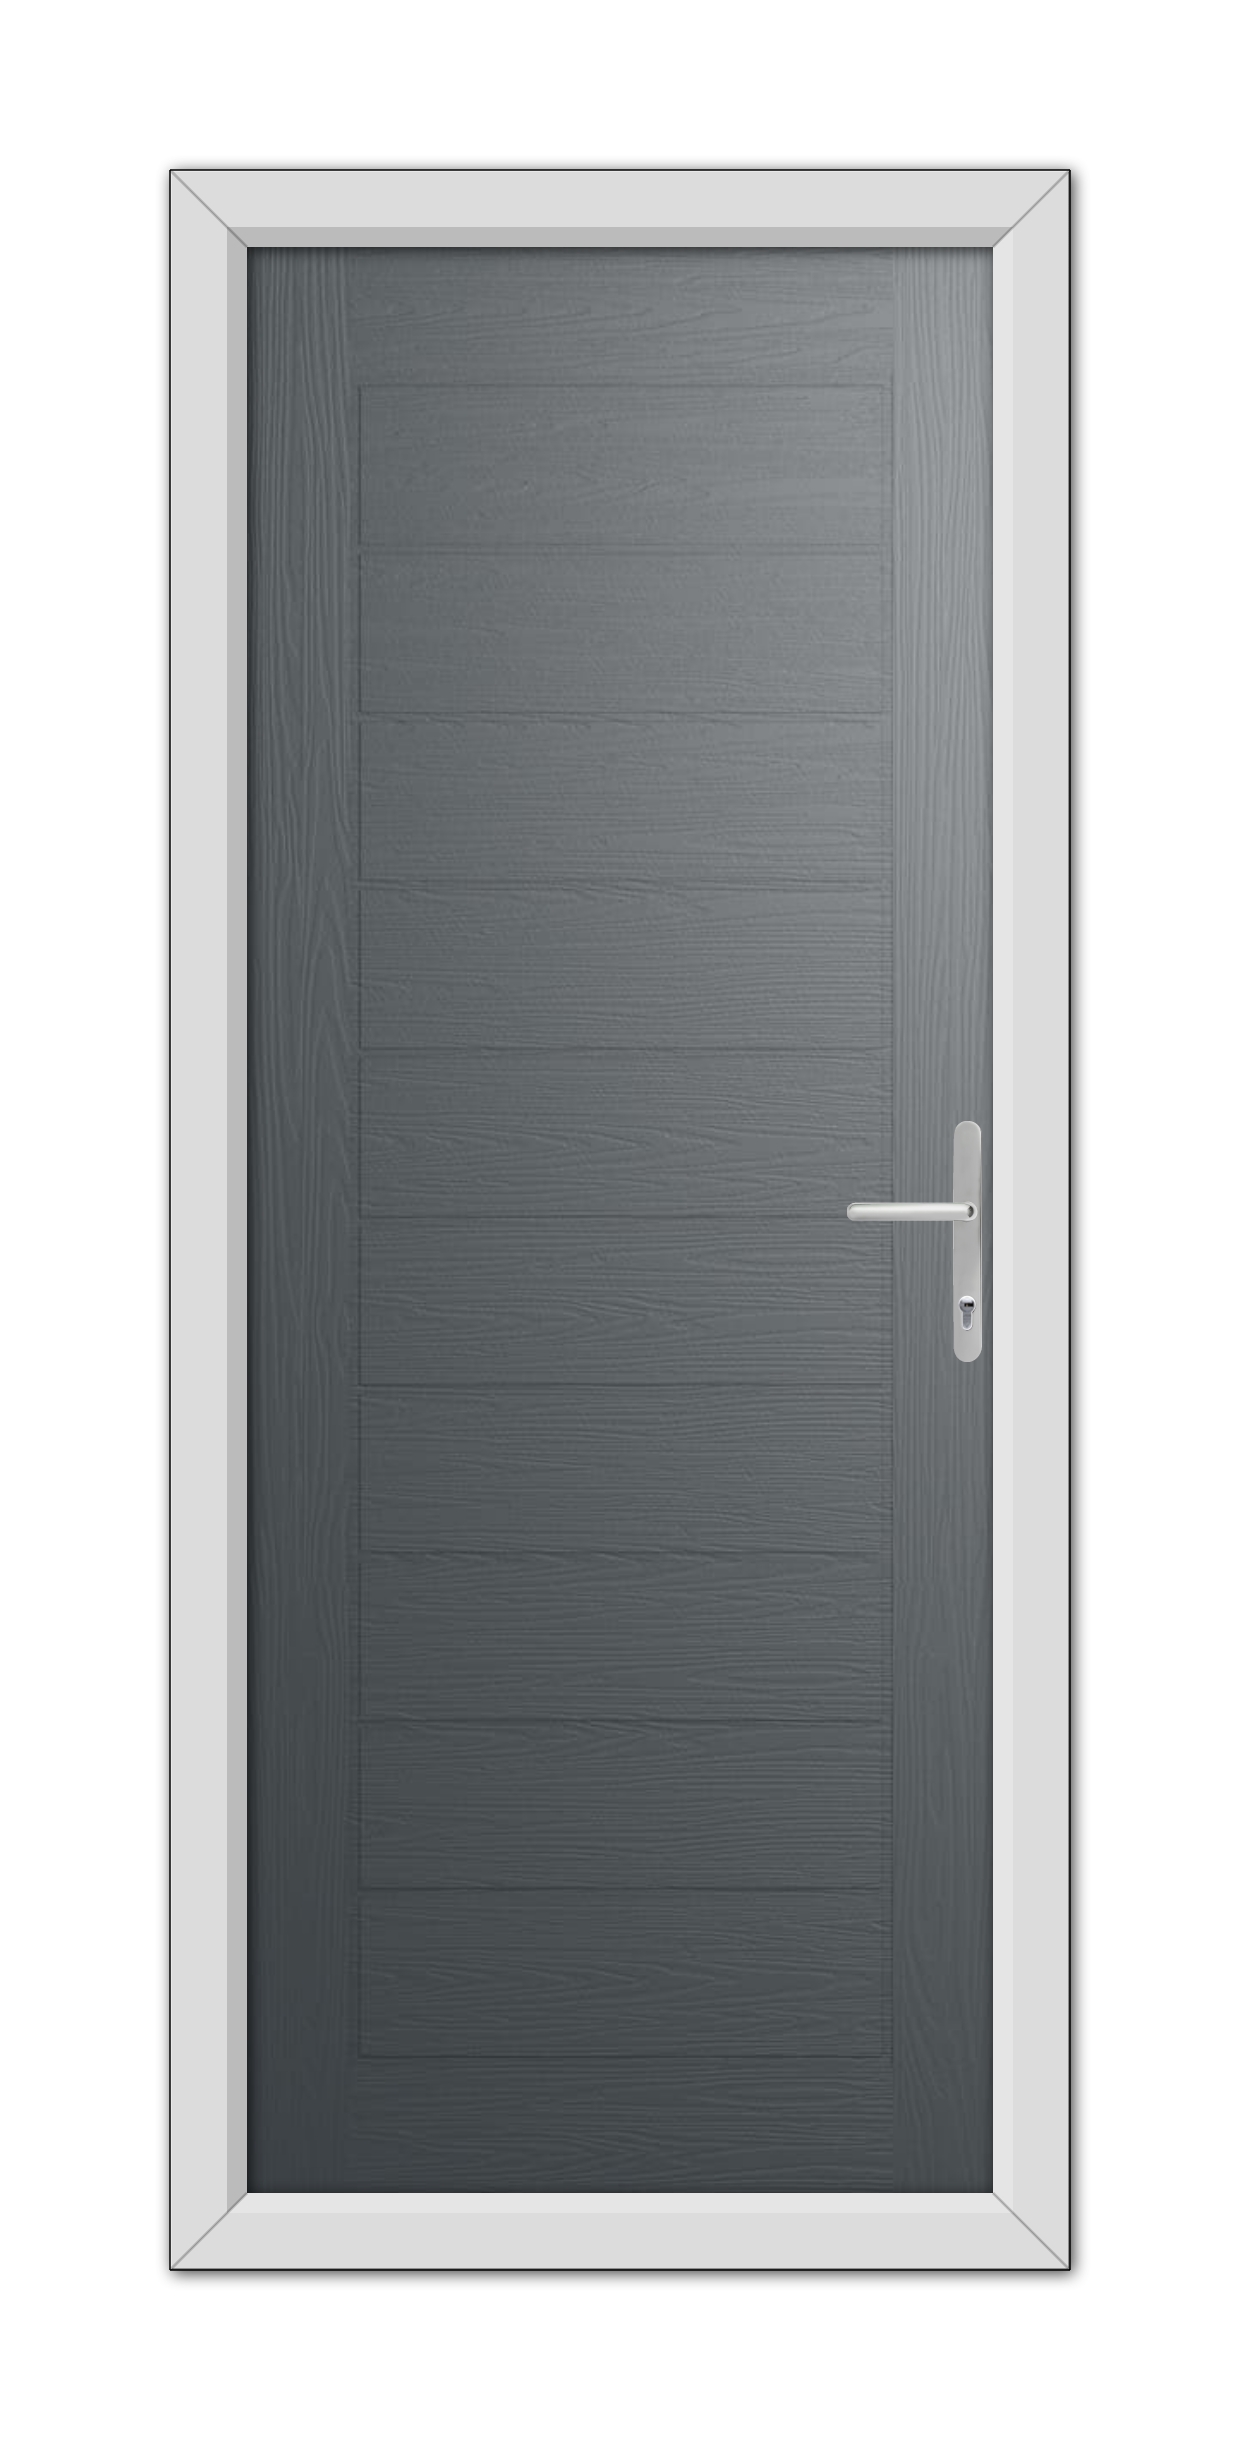 A modern closed Anthracite Grey Cambridge Composite Door with a white frame and a metallic handle, viewed straight on against a white background.